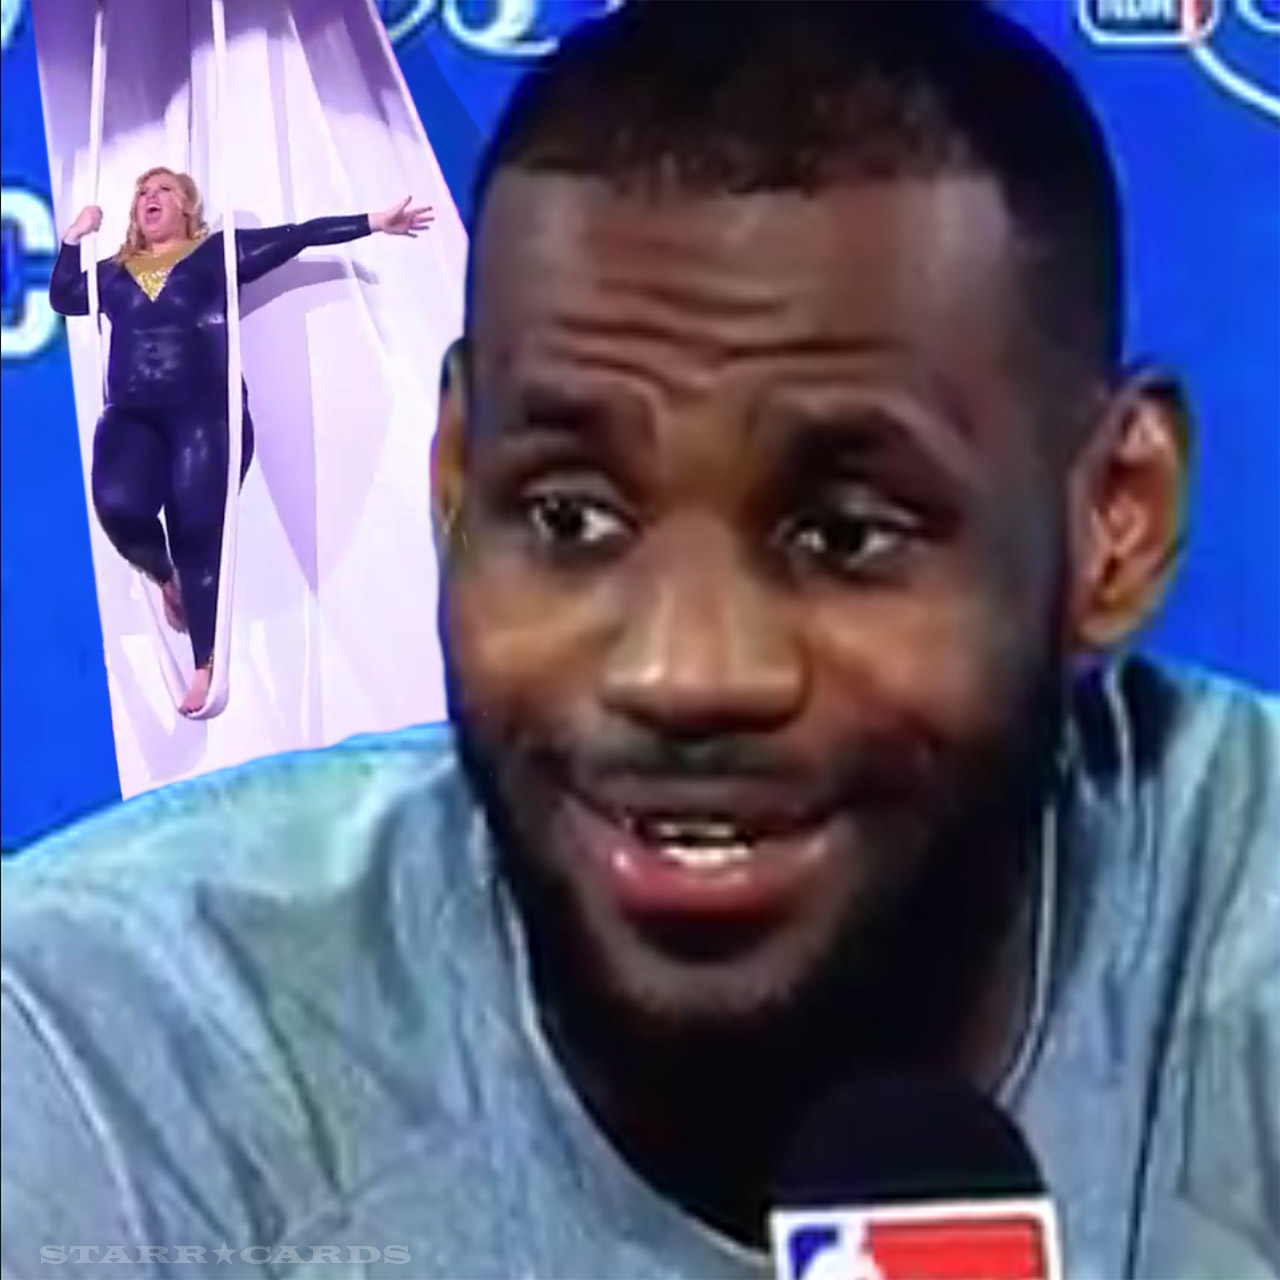 LeBron James likes Fat Amy from 'Pitch Perfect 2'